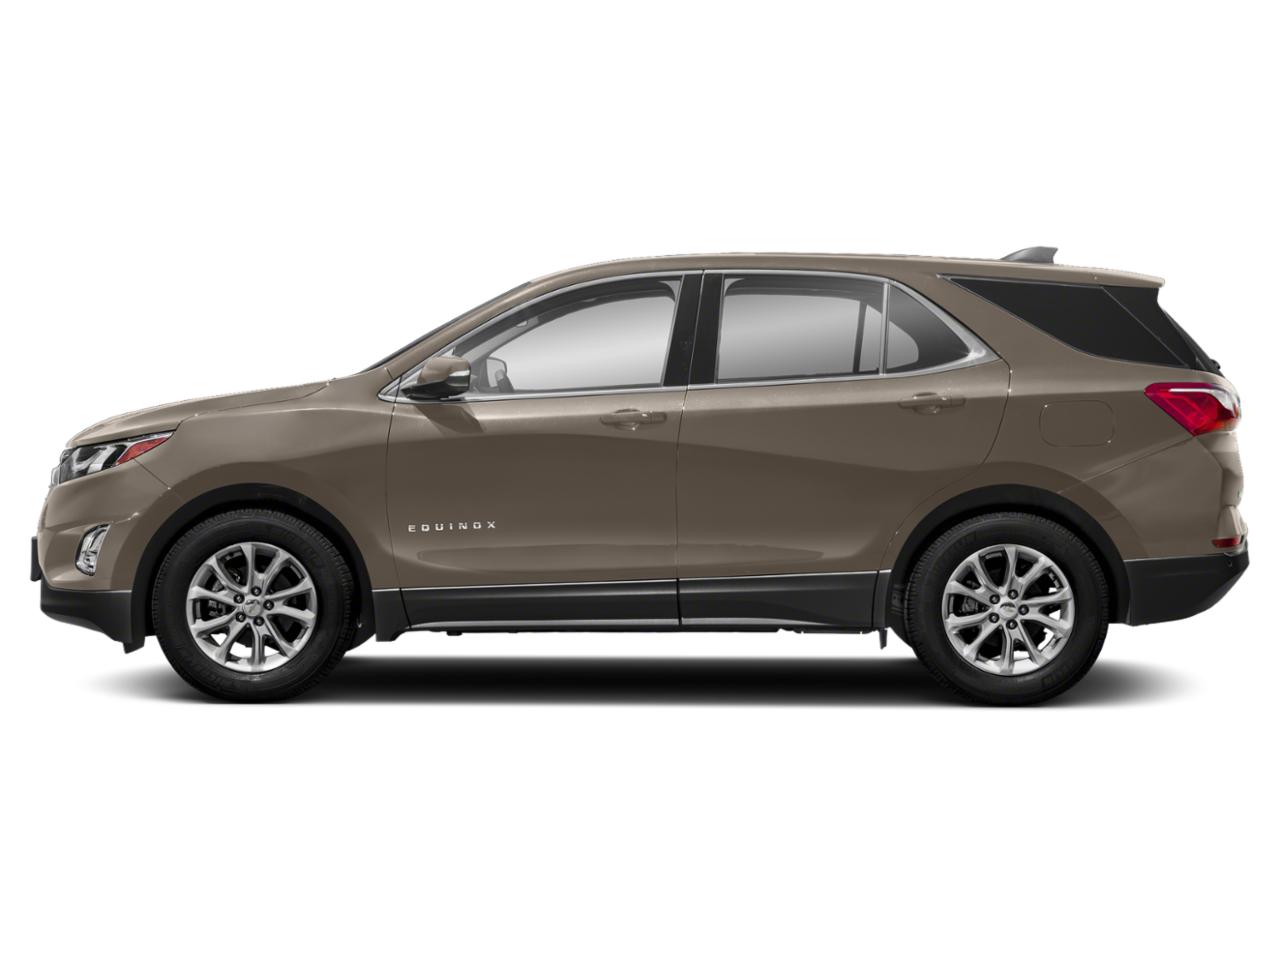 Used 2019 Chevrolet Equinox LT with VIN 3GNAXUEV5KS552527 for sale in Manistee, MI